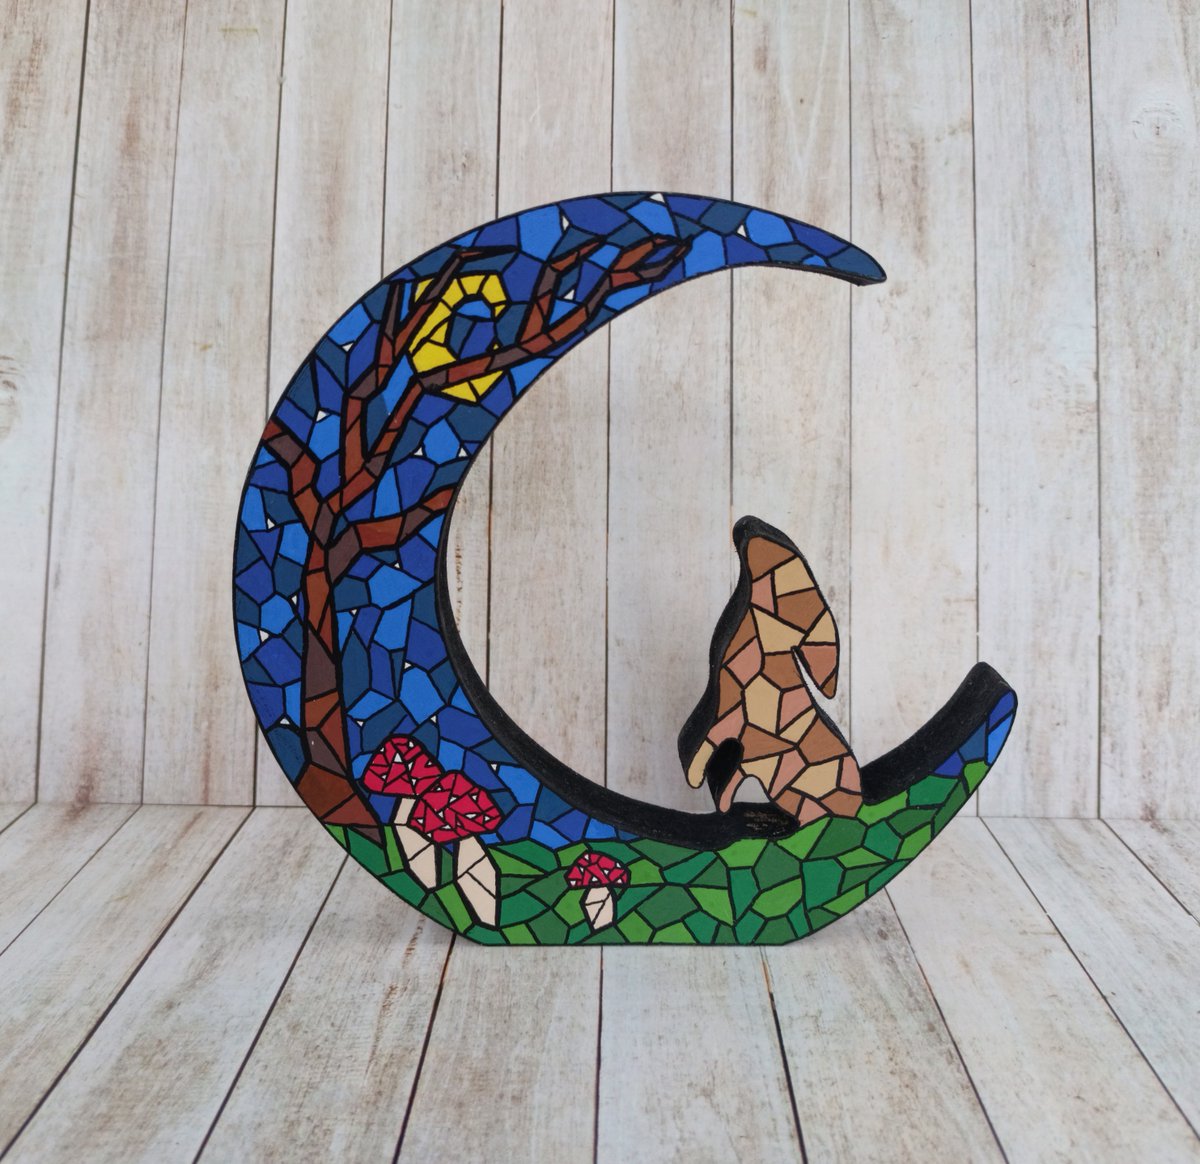 New in my @BritishCrafting shop! This moongazing hare ornament is painted with a stained-glass mosaic effect and features a little brown hare looking at a crescent moon :) #newontbch #Moongazing #hare thebritishcrafthouse.co.uk/product/moonga…